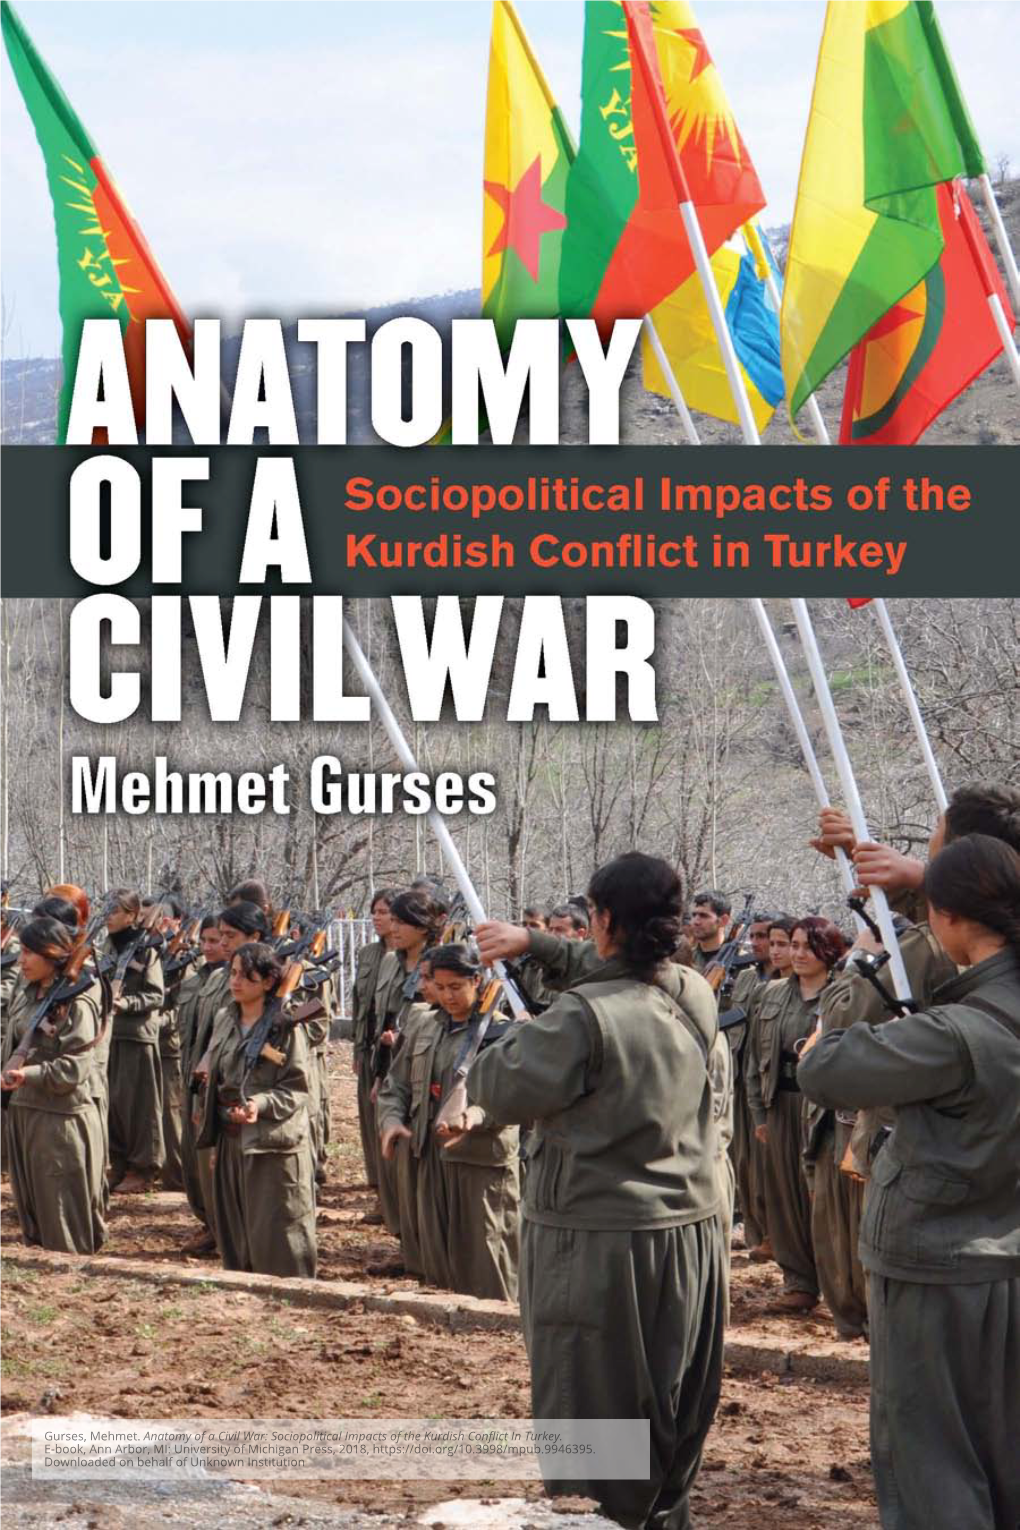 Anatomy of a Civil War: Sociopolitical Impacts of the Kurdish Conflict in Turkey